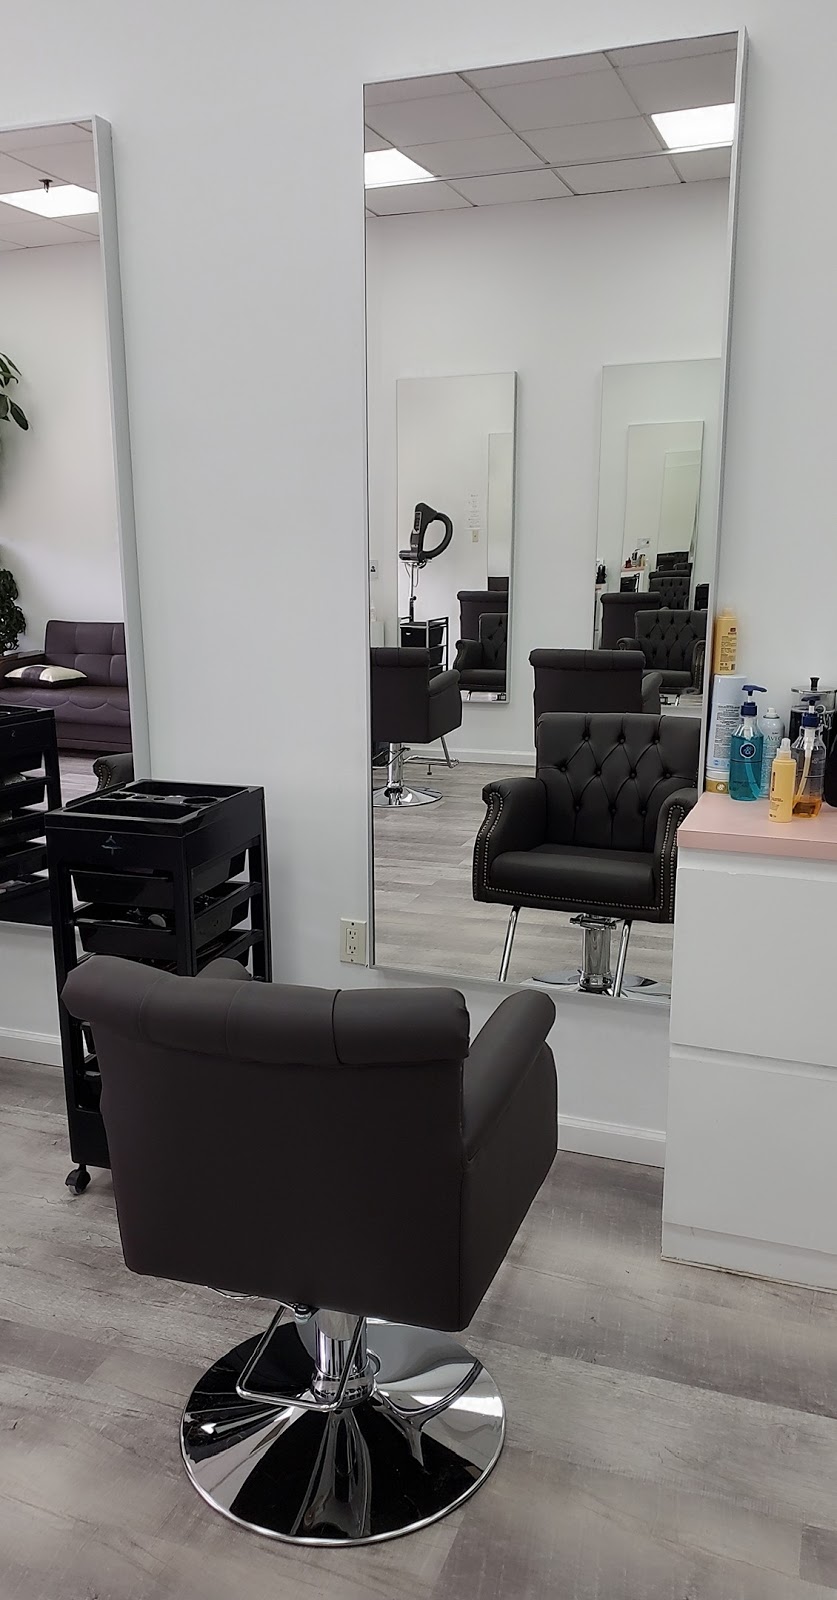 House of Beauty | 913 Saw Mill River Rd, Ardsley, NY 10502 | Phone: (914) 693-8080